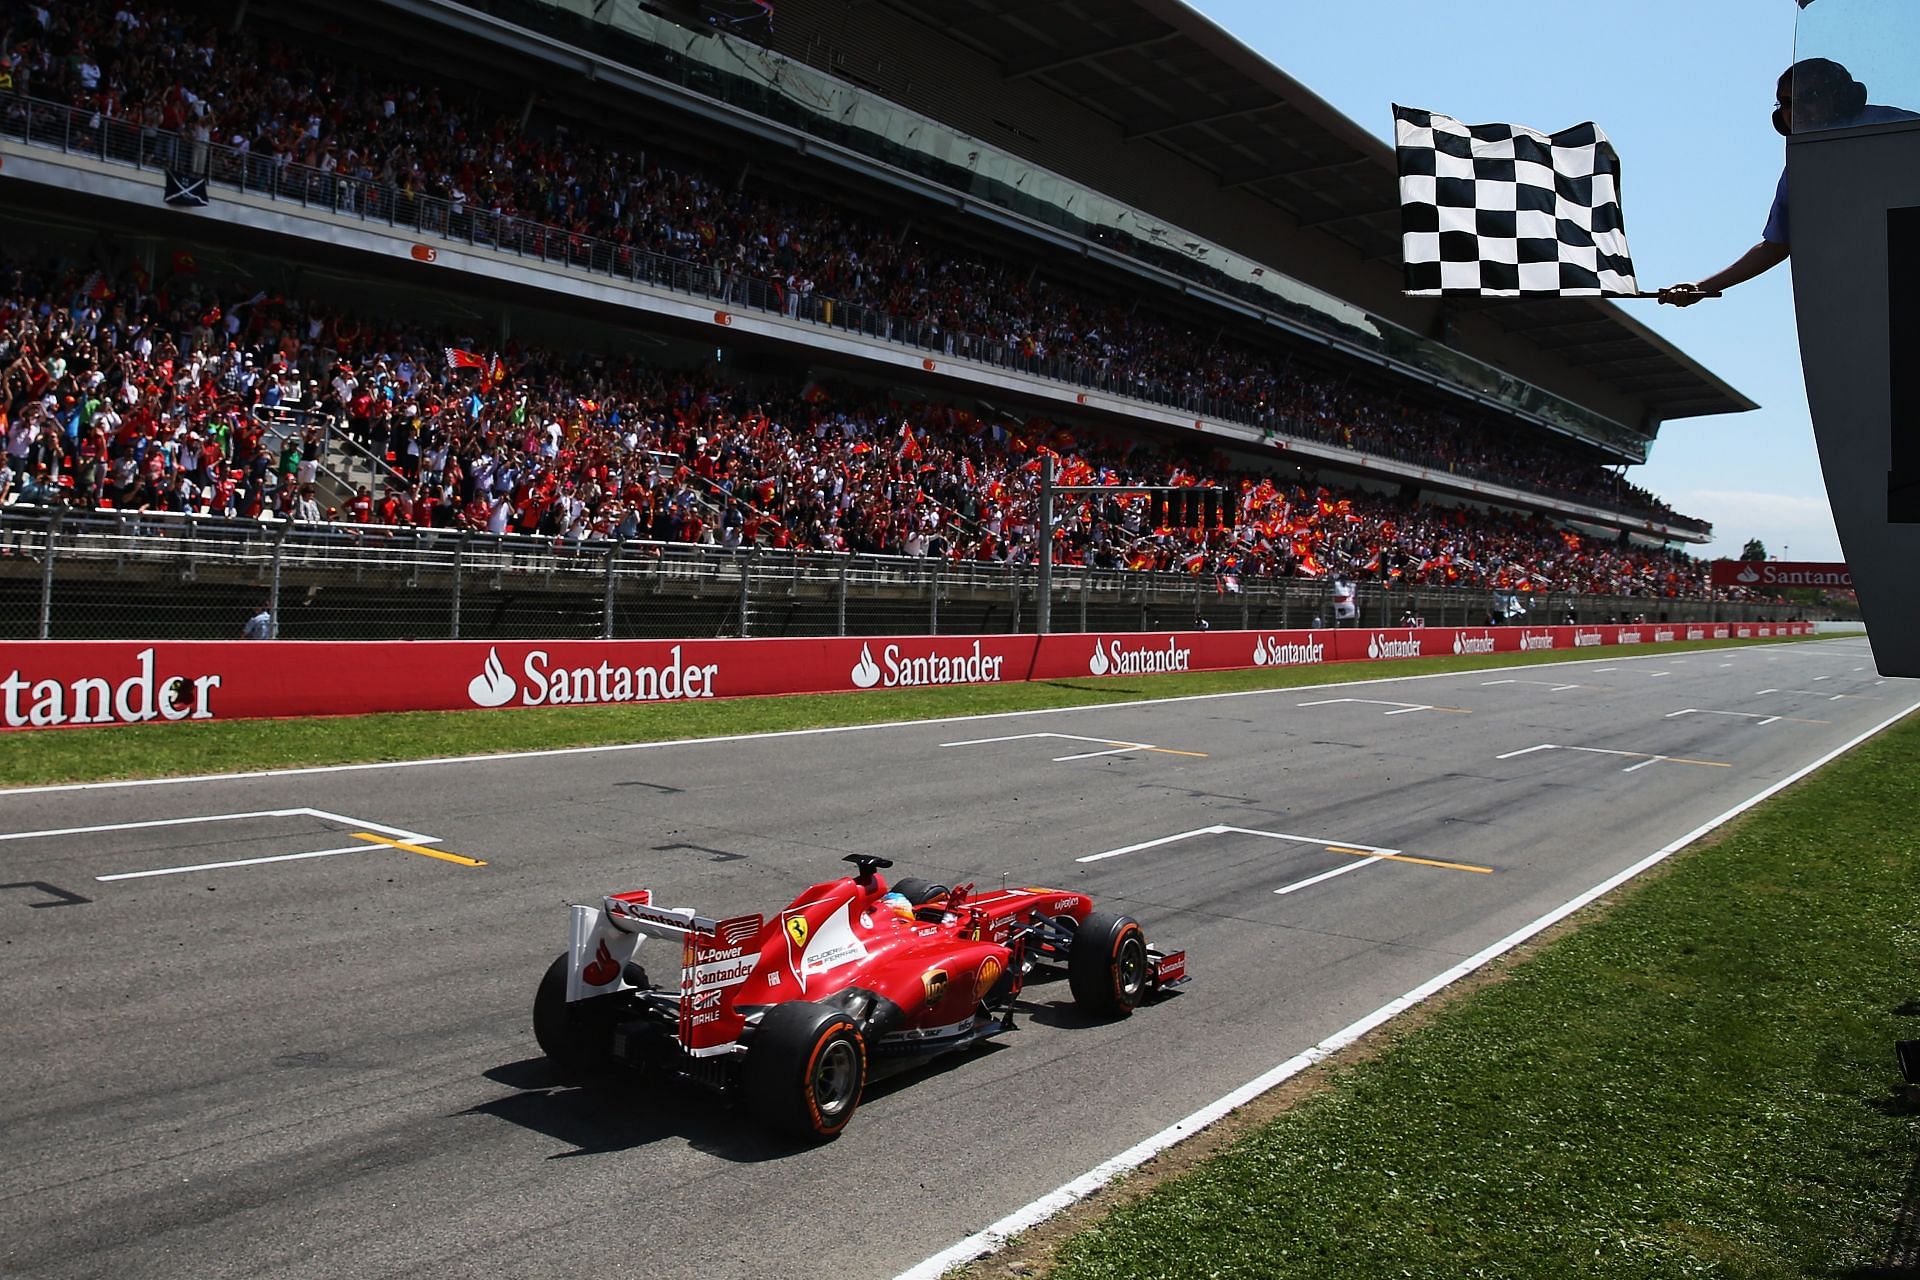 Alonso crossing the checkered flag at the 2013 Spanish F1 Grand Prix